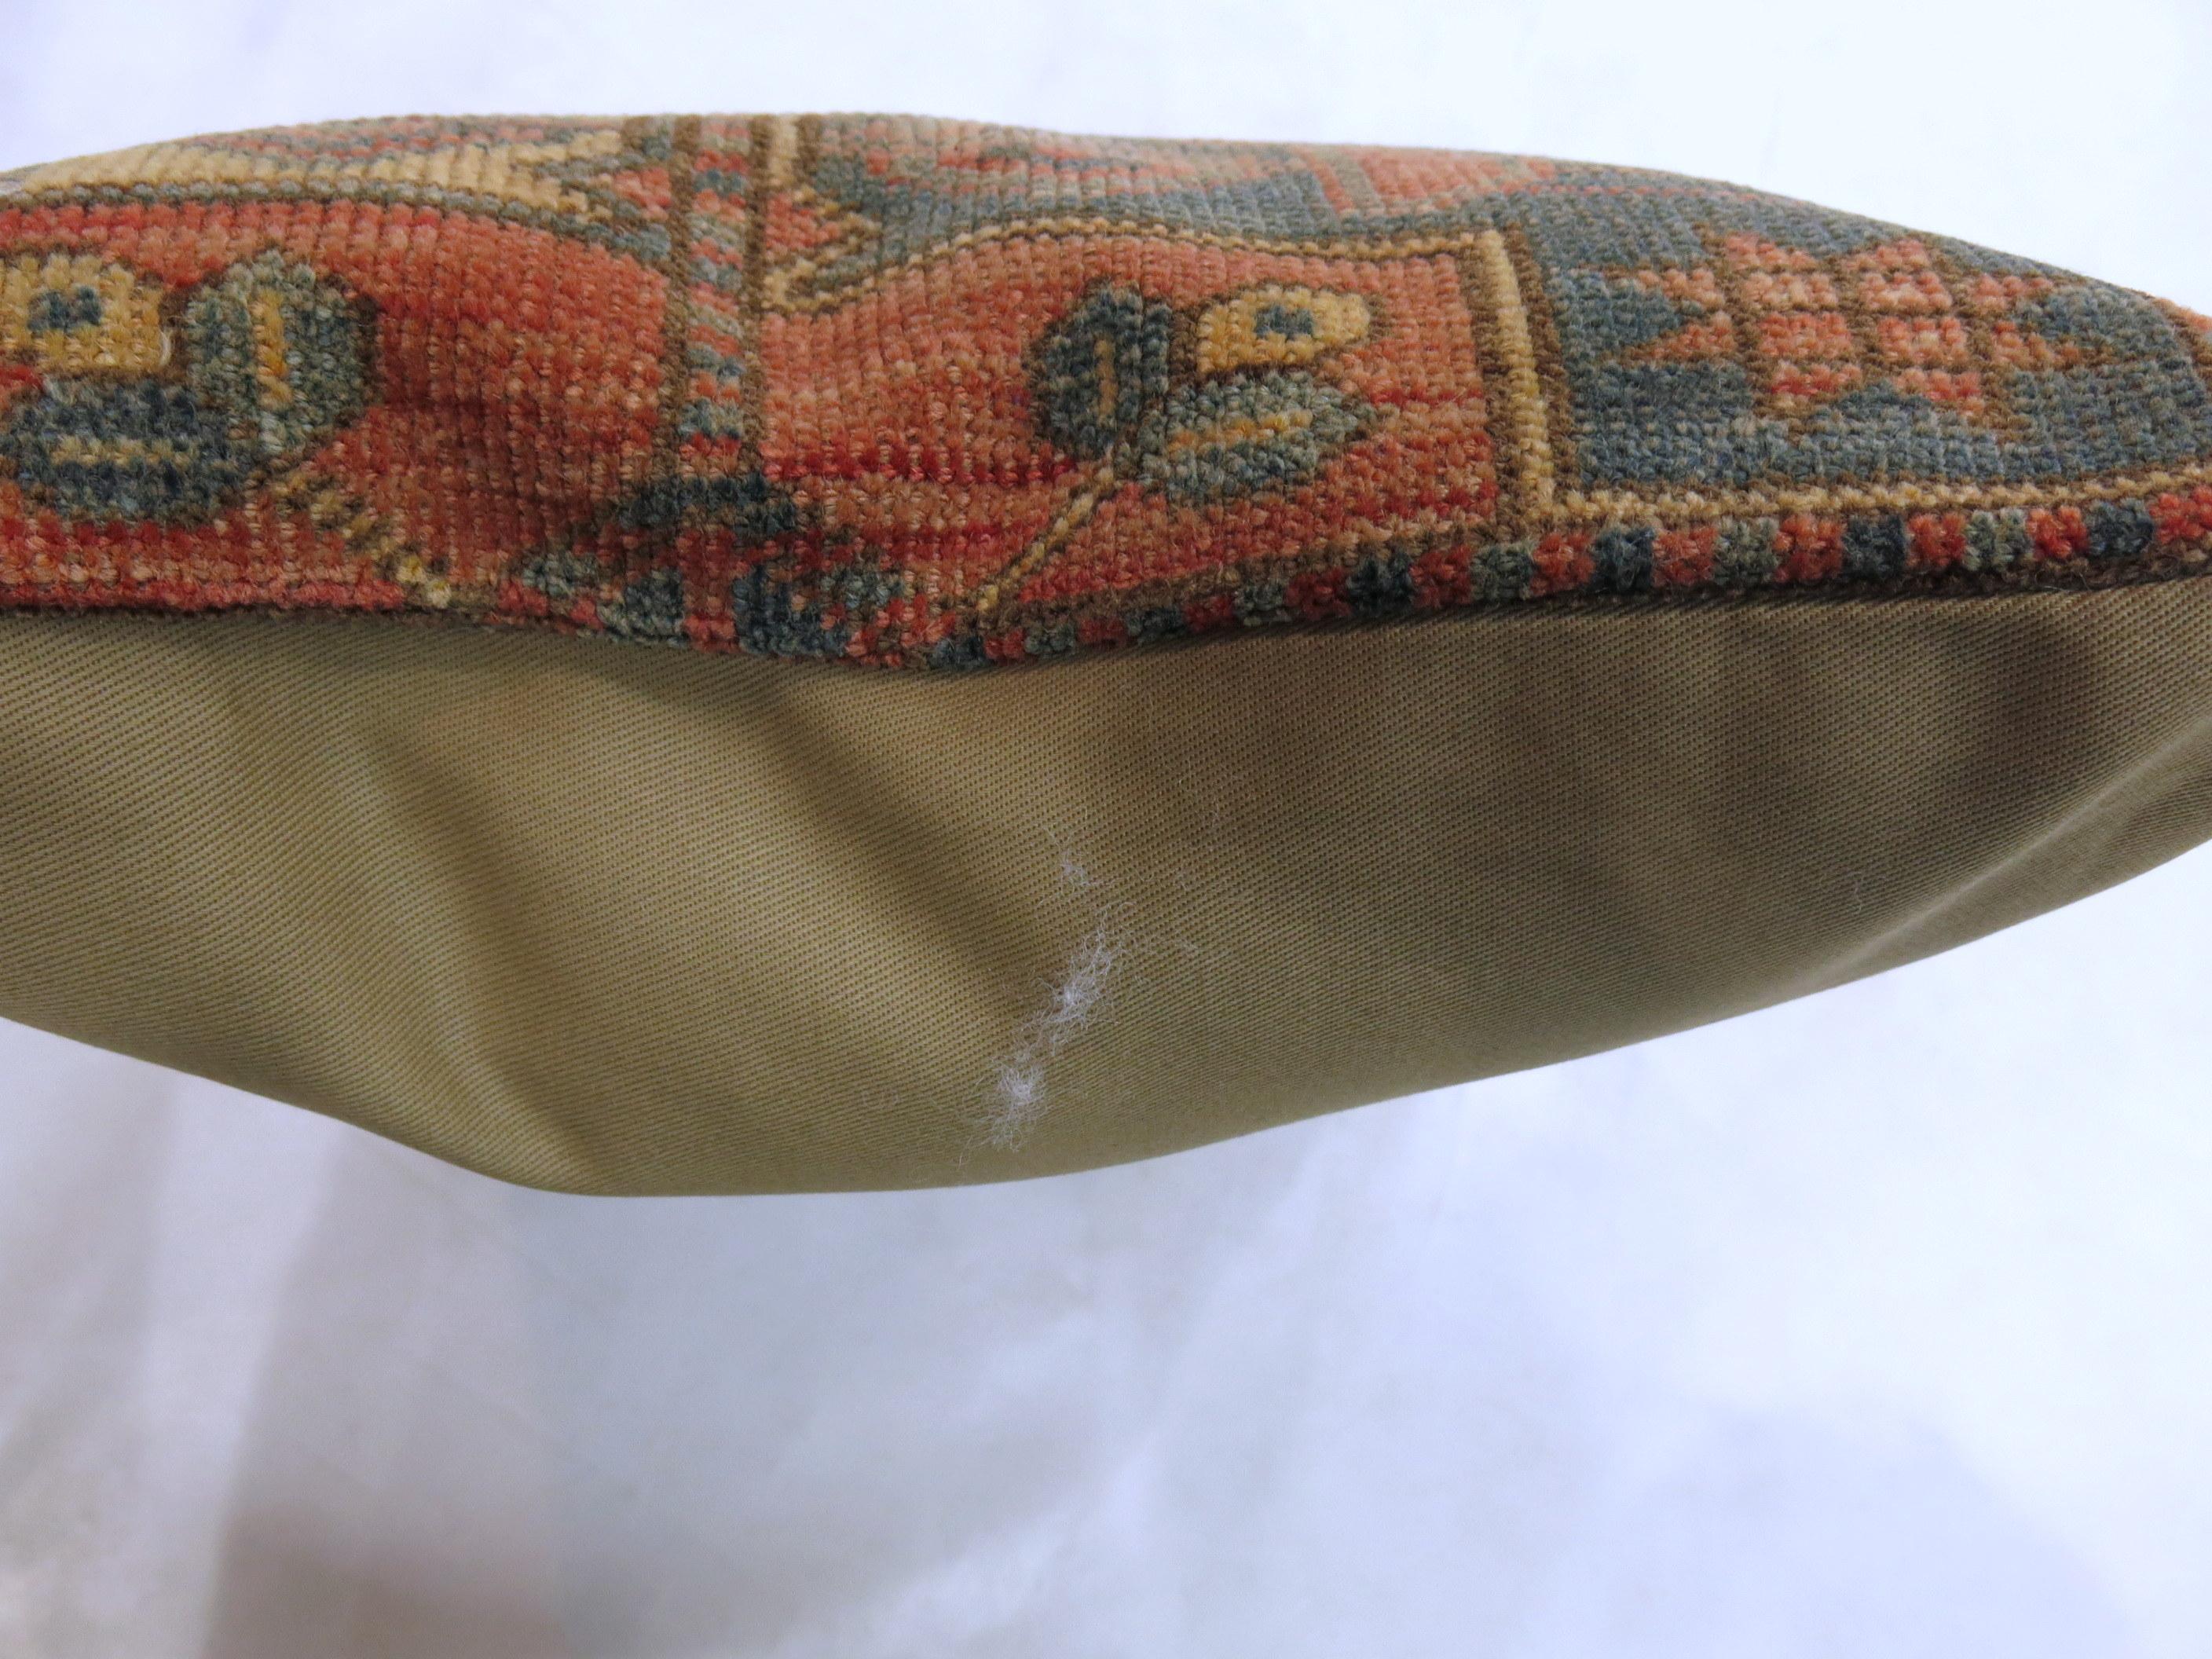 Pillow made from a 19th century antique Ersari rug with cotton back and zipper closure.

Measures: 16